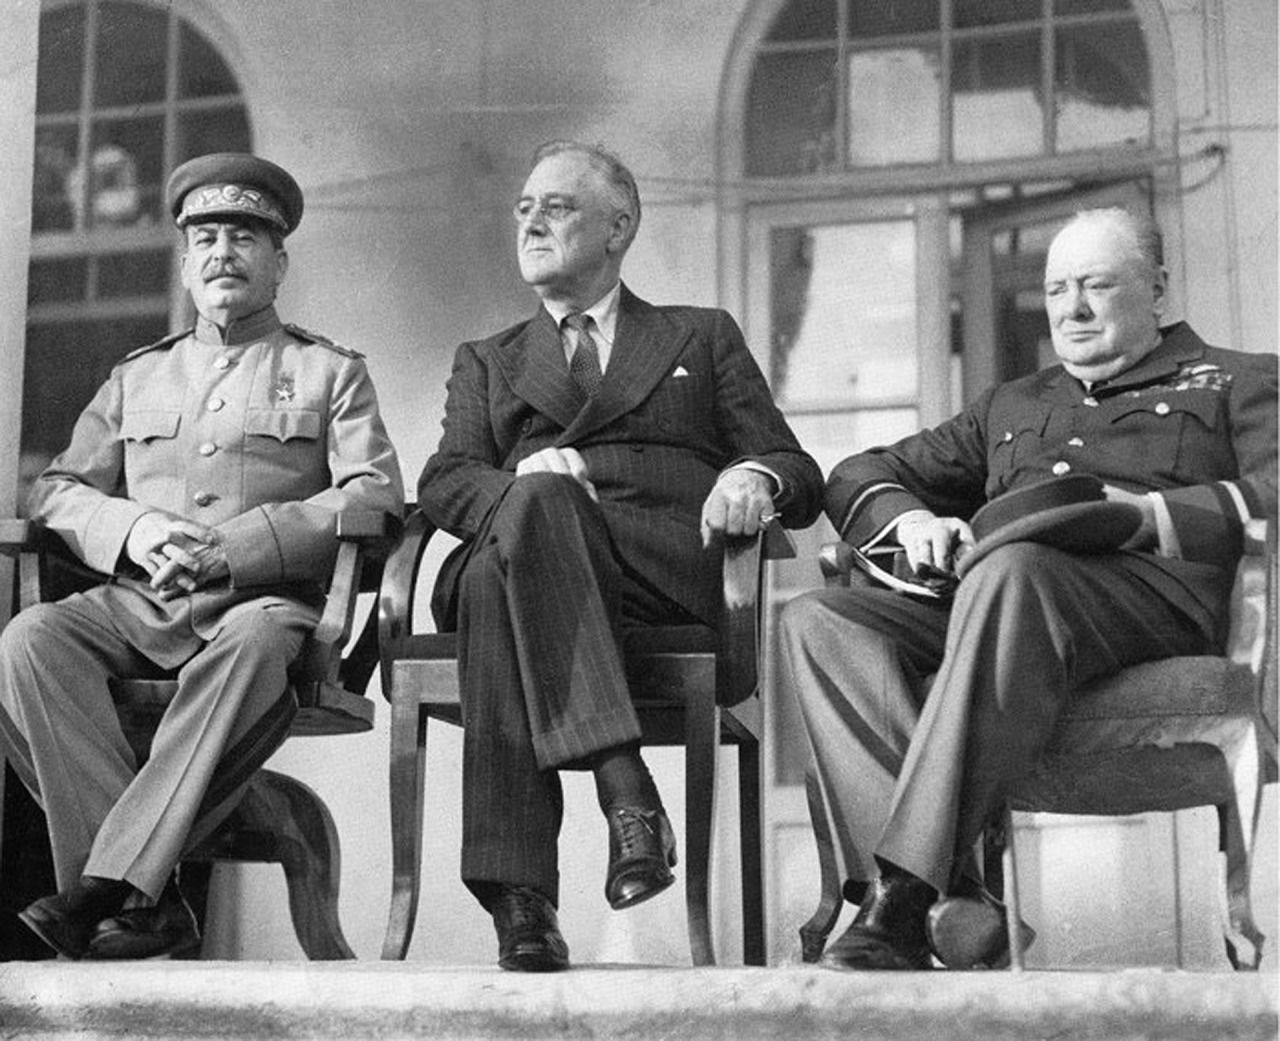 The “Big Three” - Stalin, Roosevelt and Churchill - meet at the Tehran Conference, 1943.